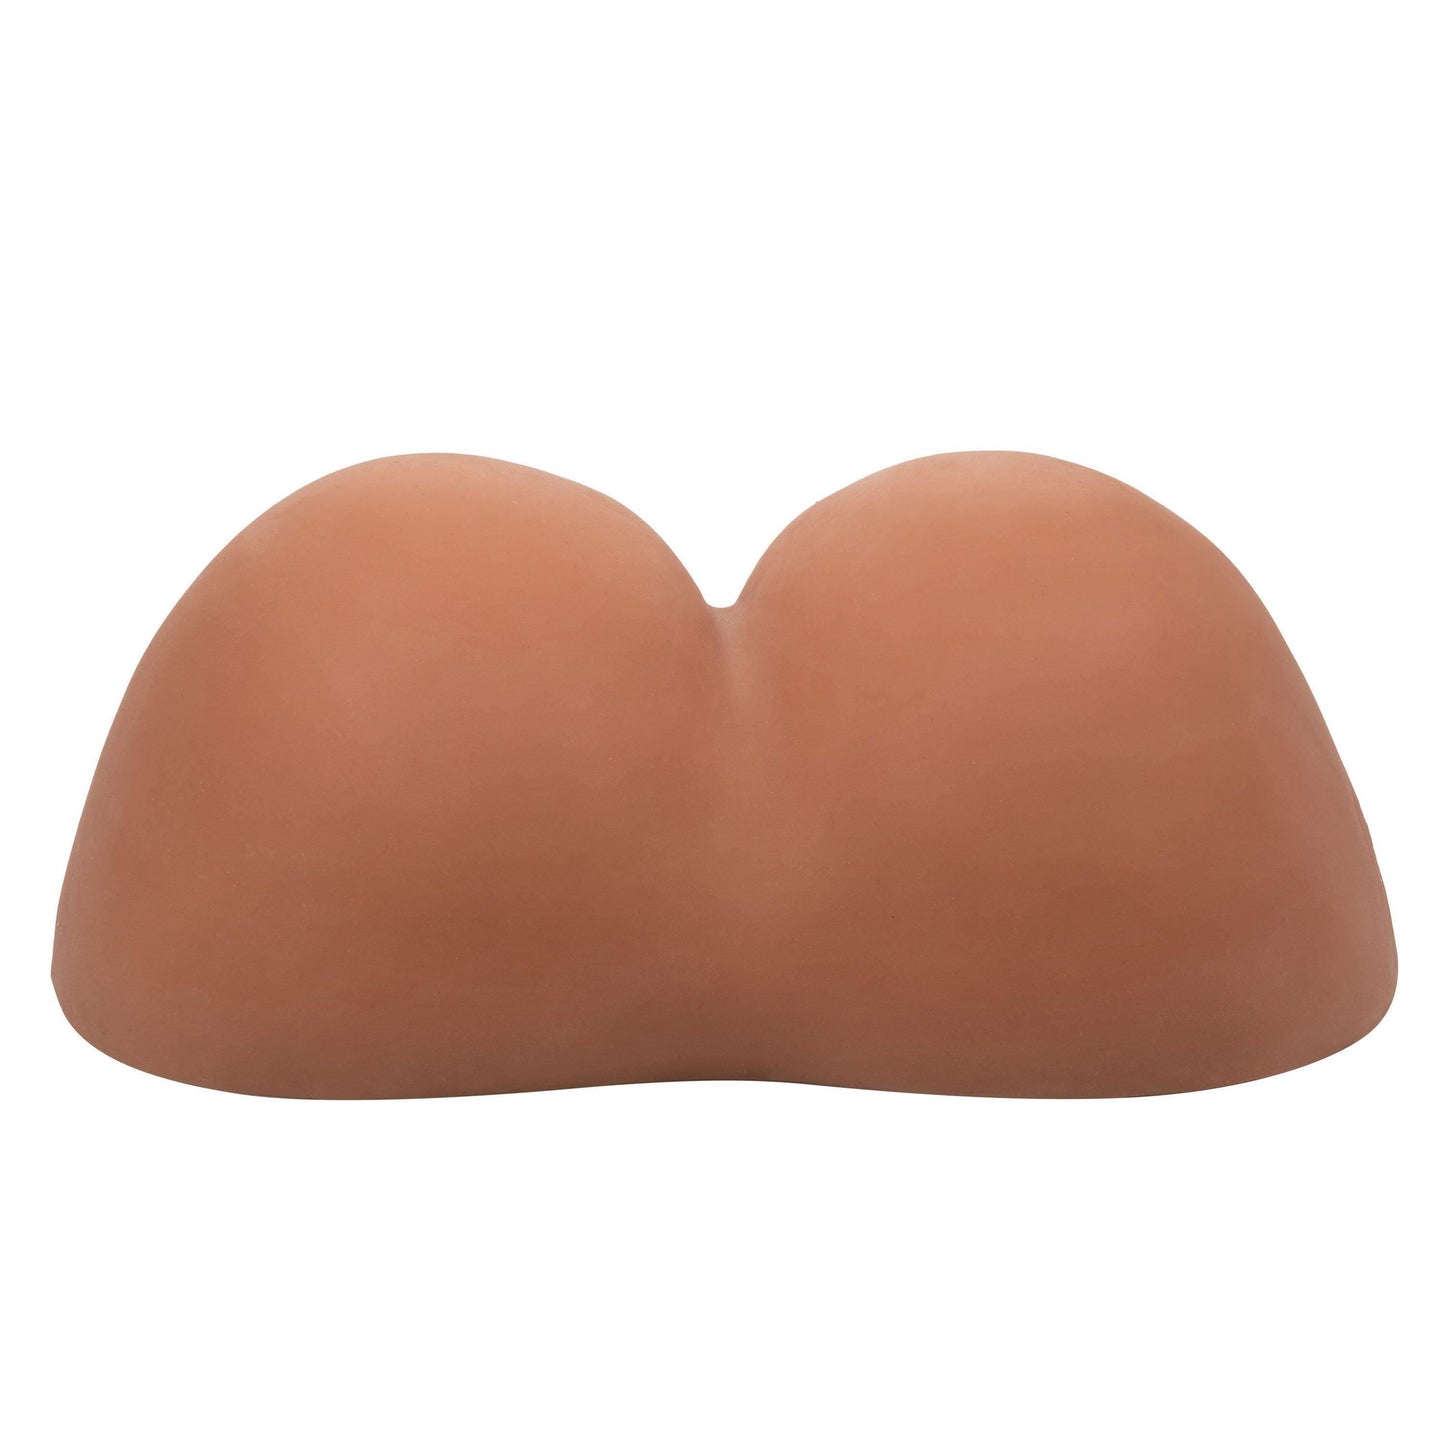 Stroke It Life-Size Ass - Brown - My Sex Toy Hub